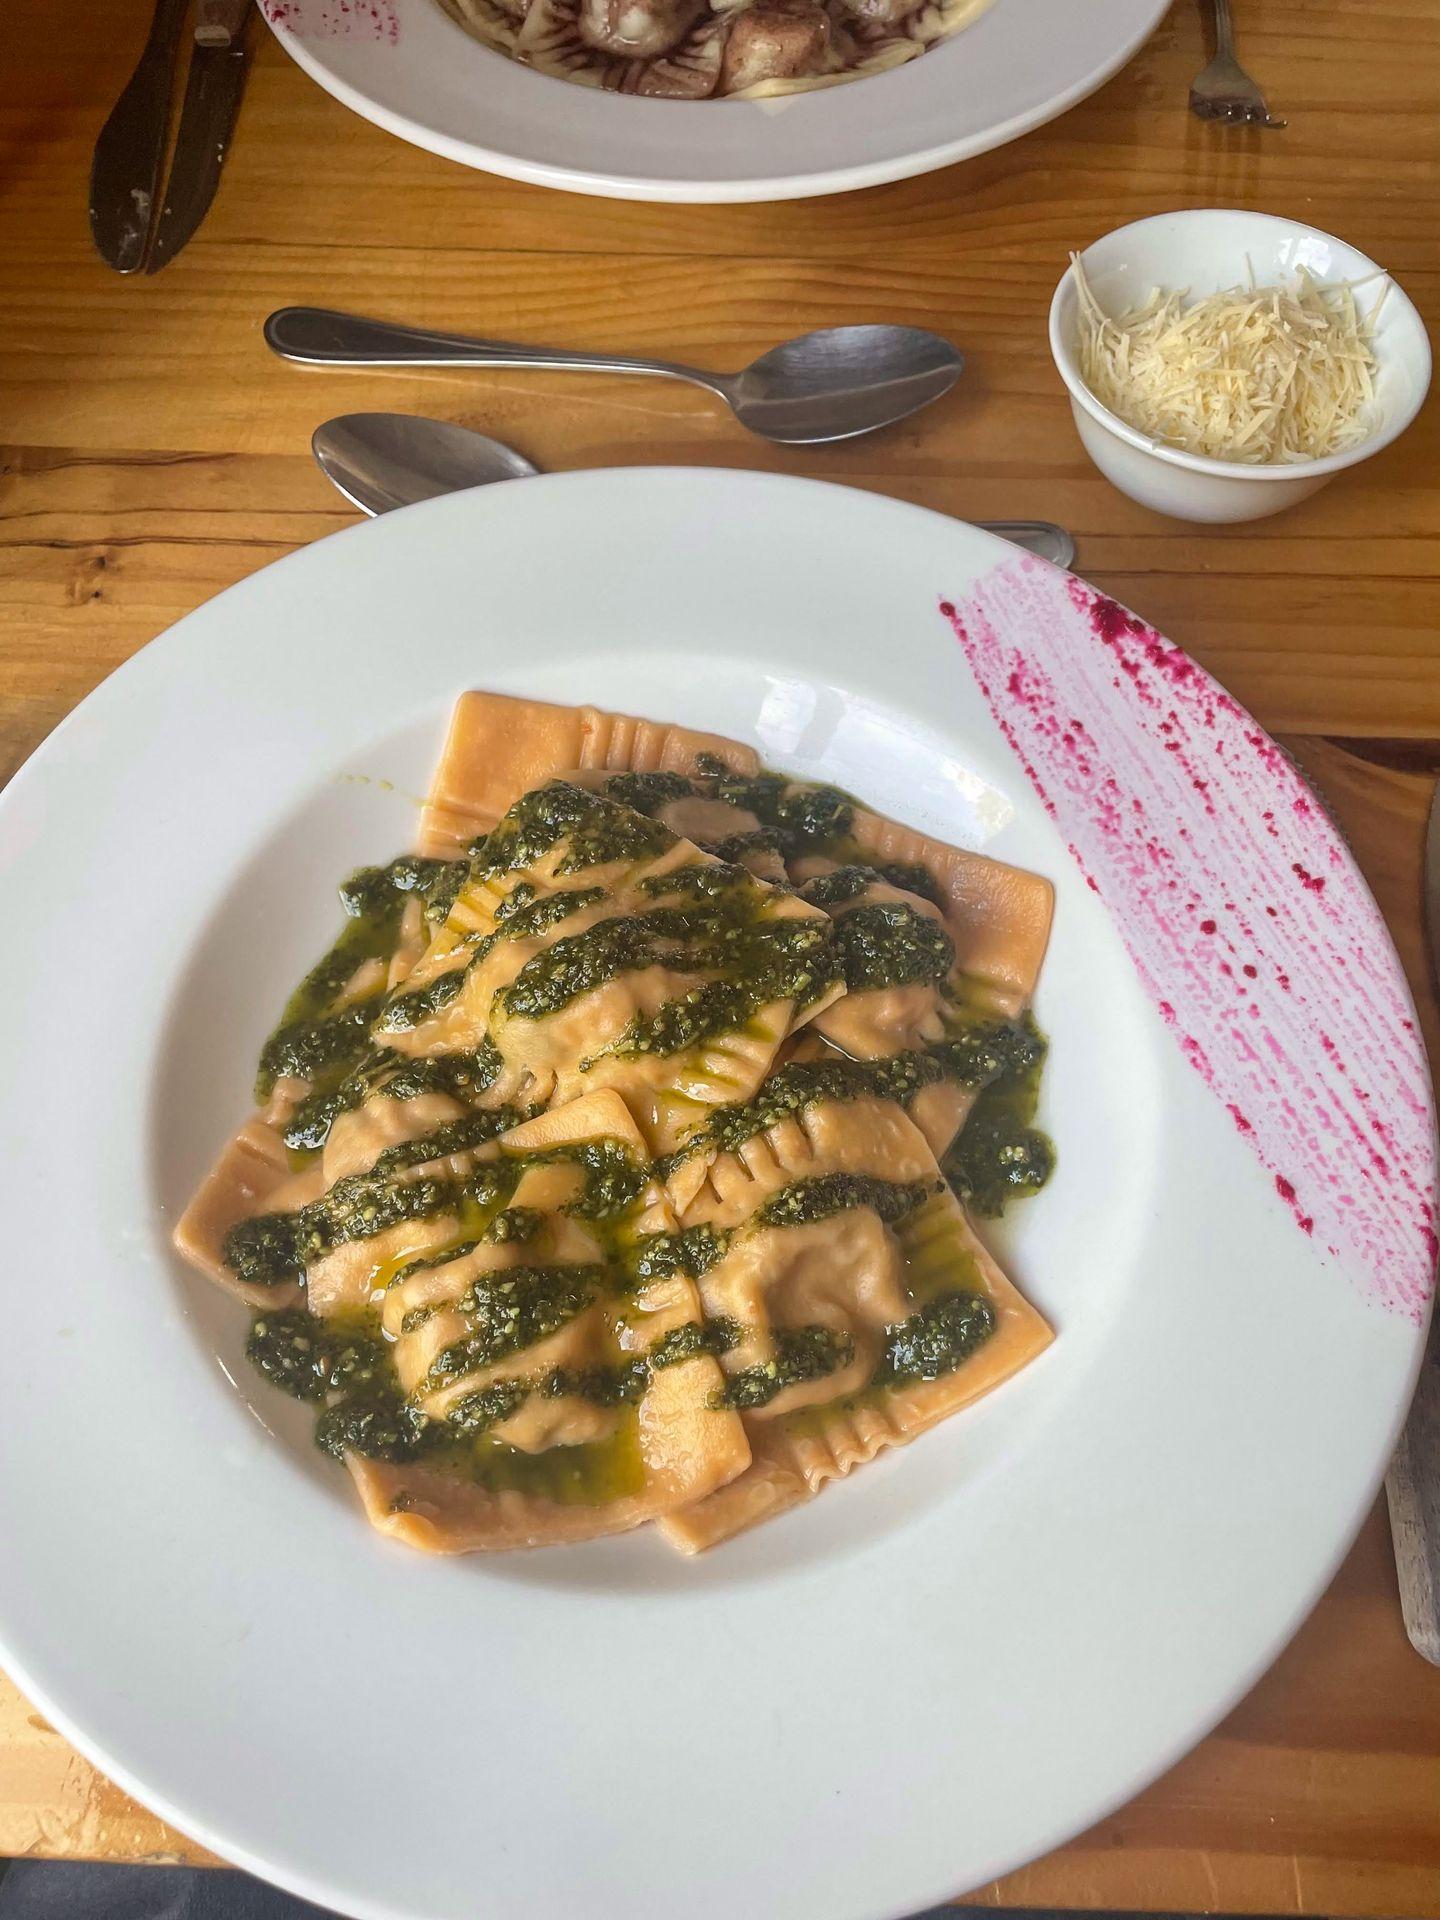 A plate of ravioli drizzled with a green sauce. There is also a bit of purple sauce used as decoration.